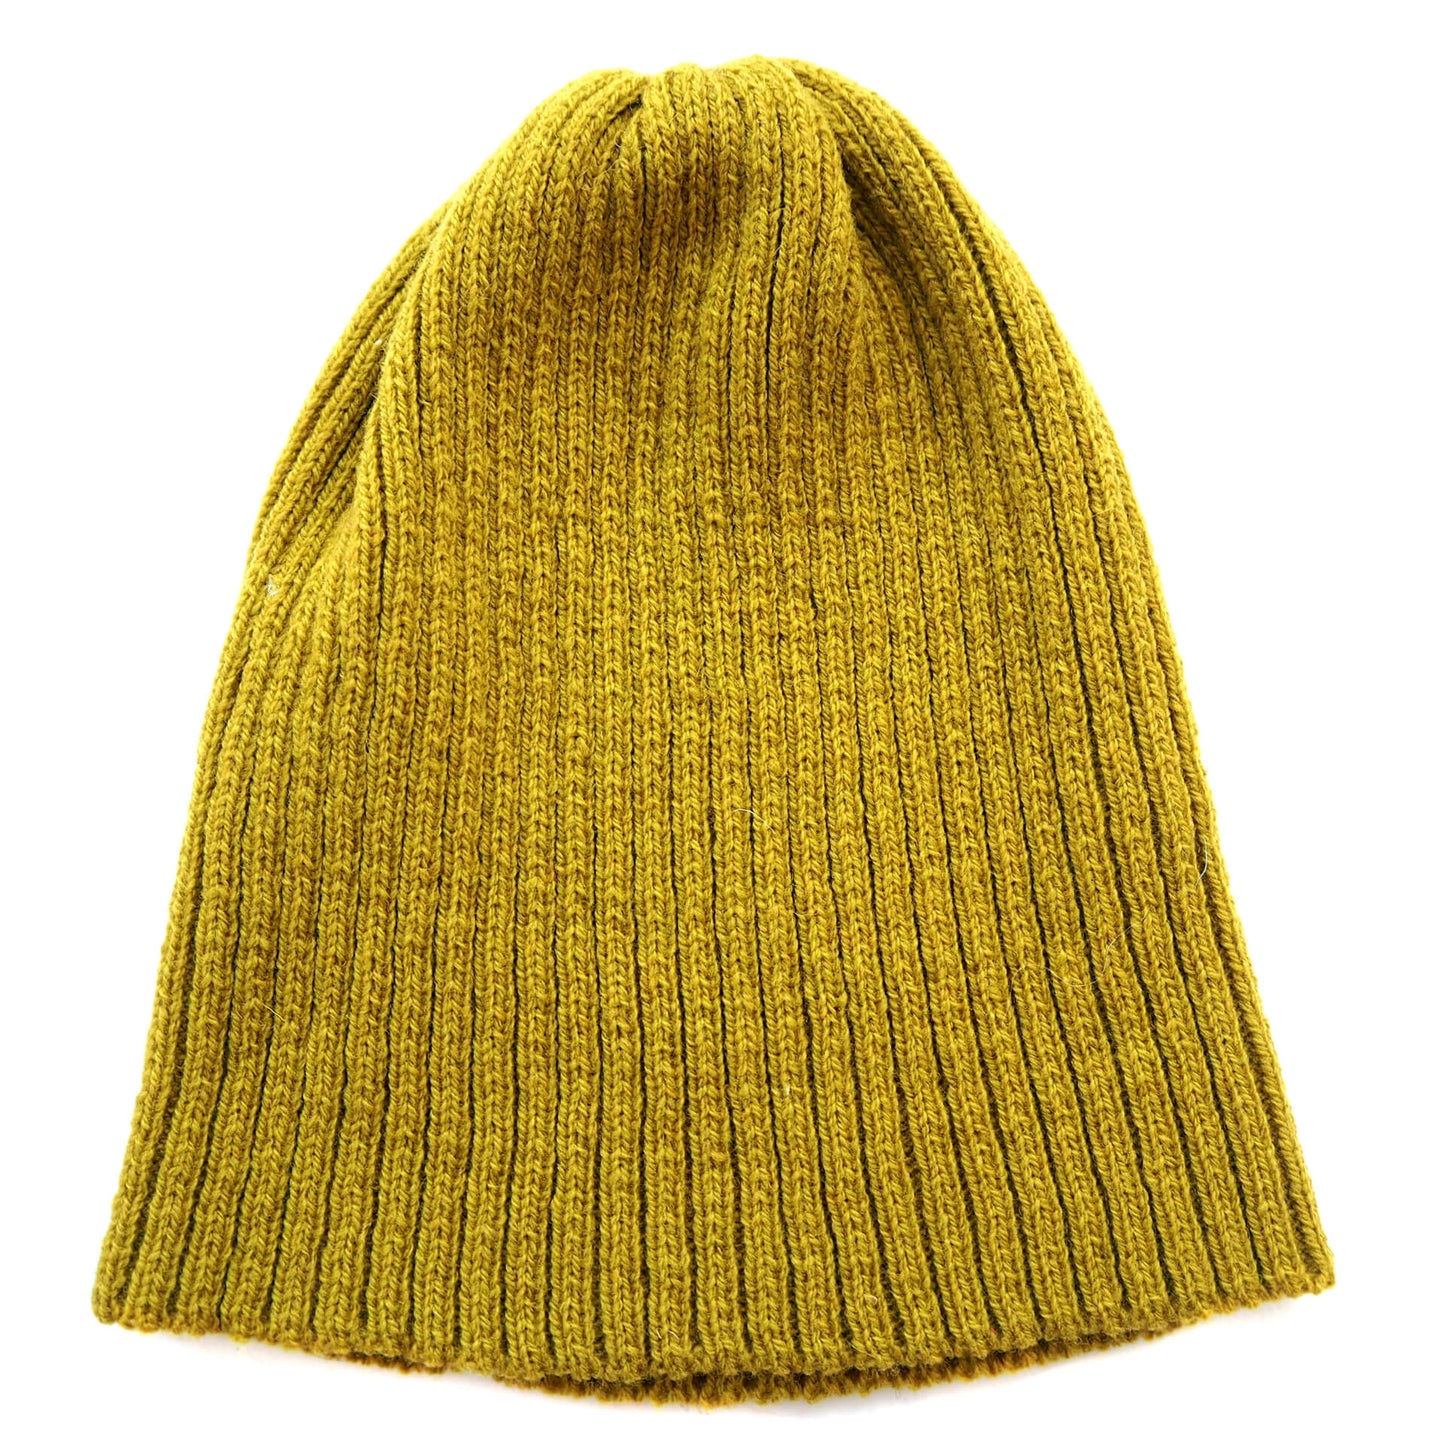 A lime green ribbed beanie without a folded brim, by K.Moods. It is on a white background.